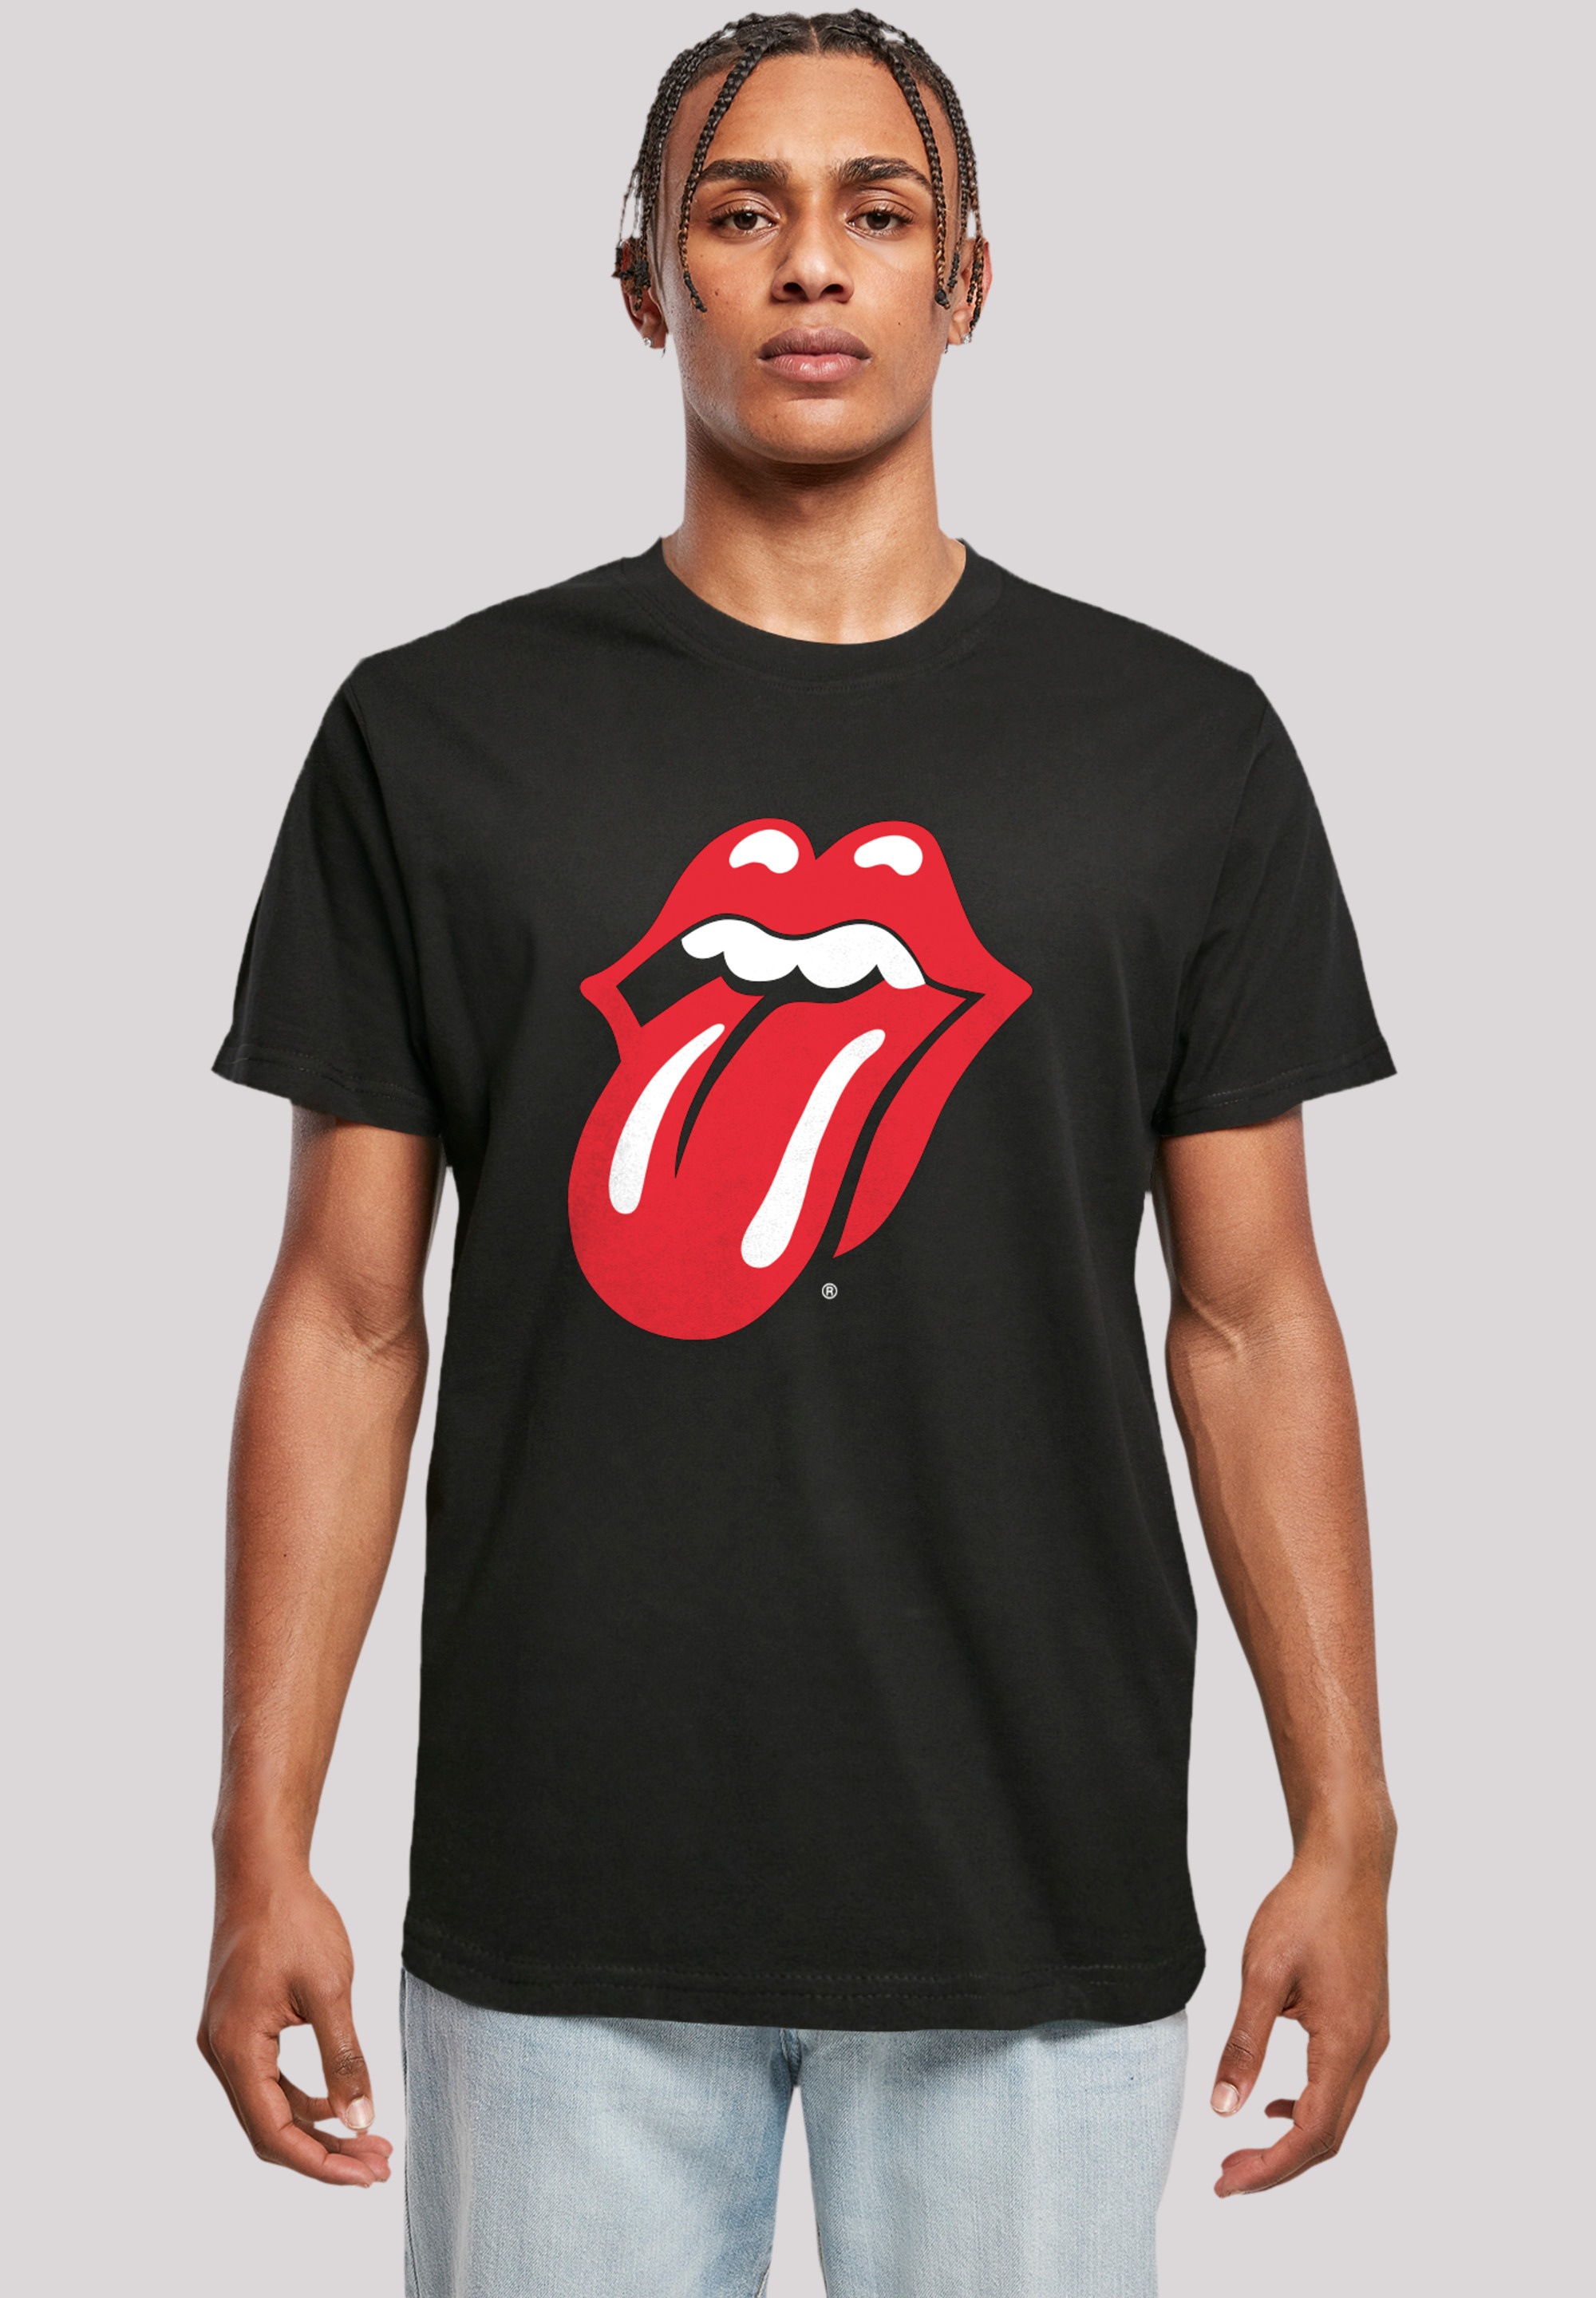 F4NT4STIC T-Shirt »The Rolling kaufen ▷ Zunge«, Rote BAUR Print | Stones